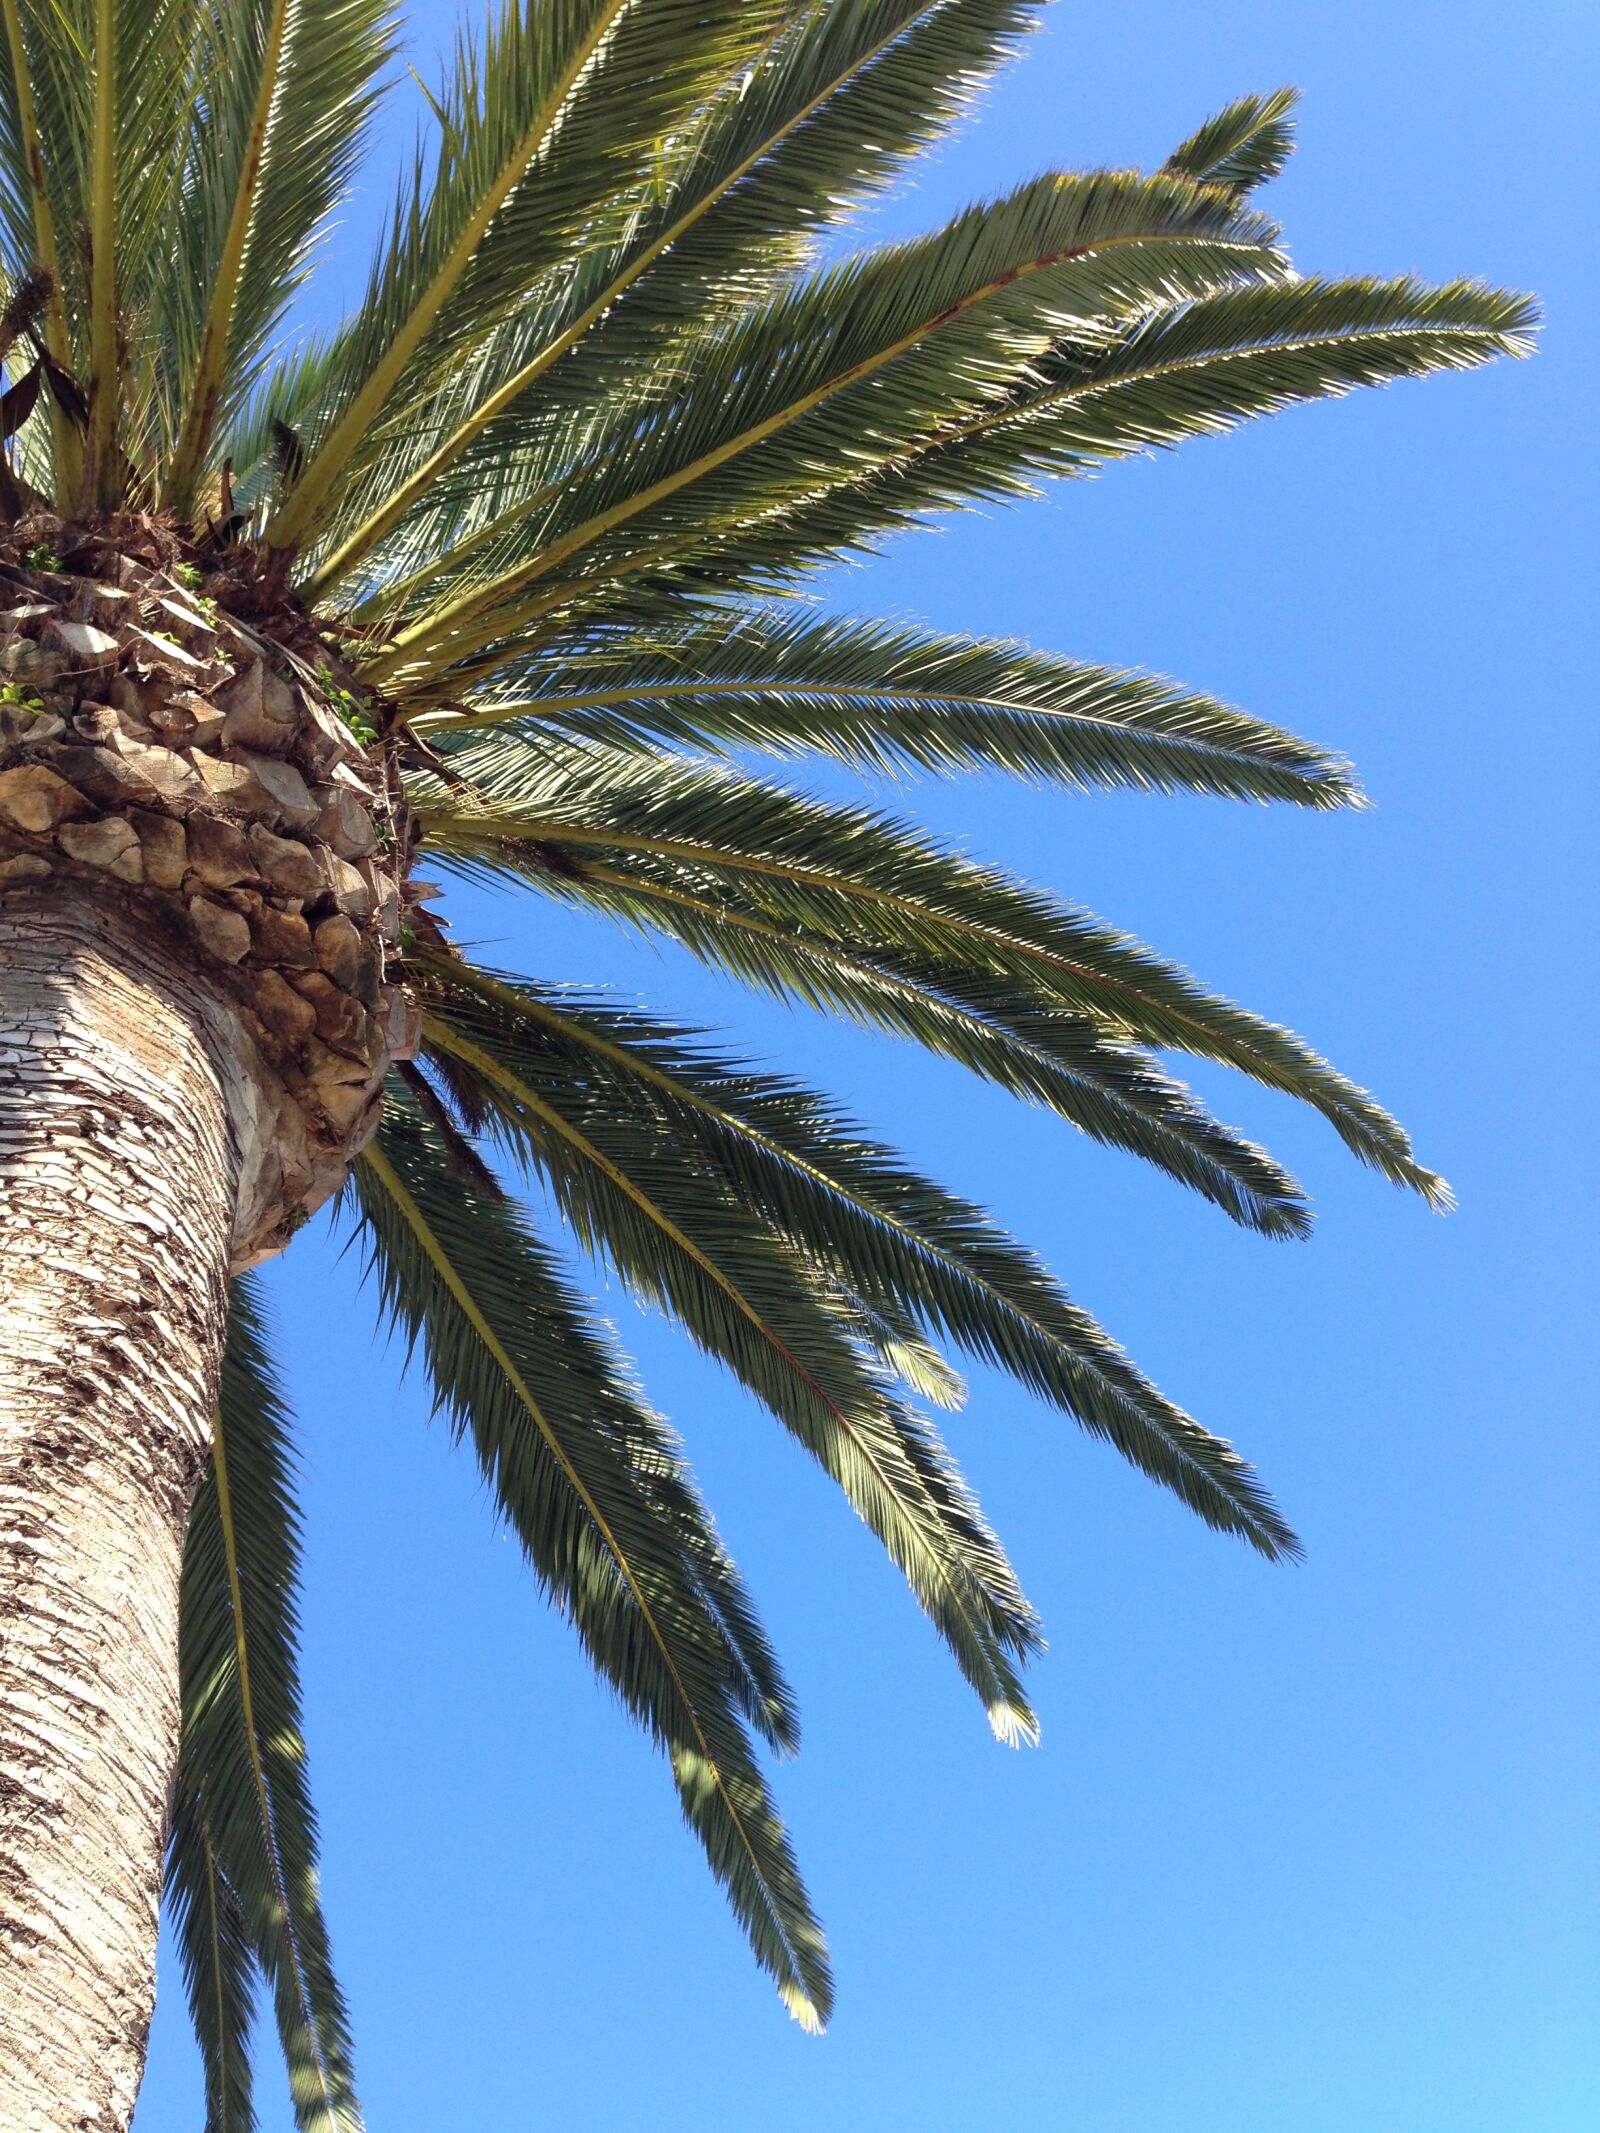 Apple iPhone 5 sample photo. Palm tree, nature, vacation photography